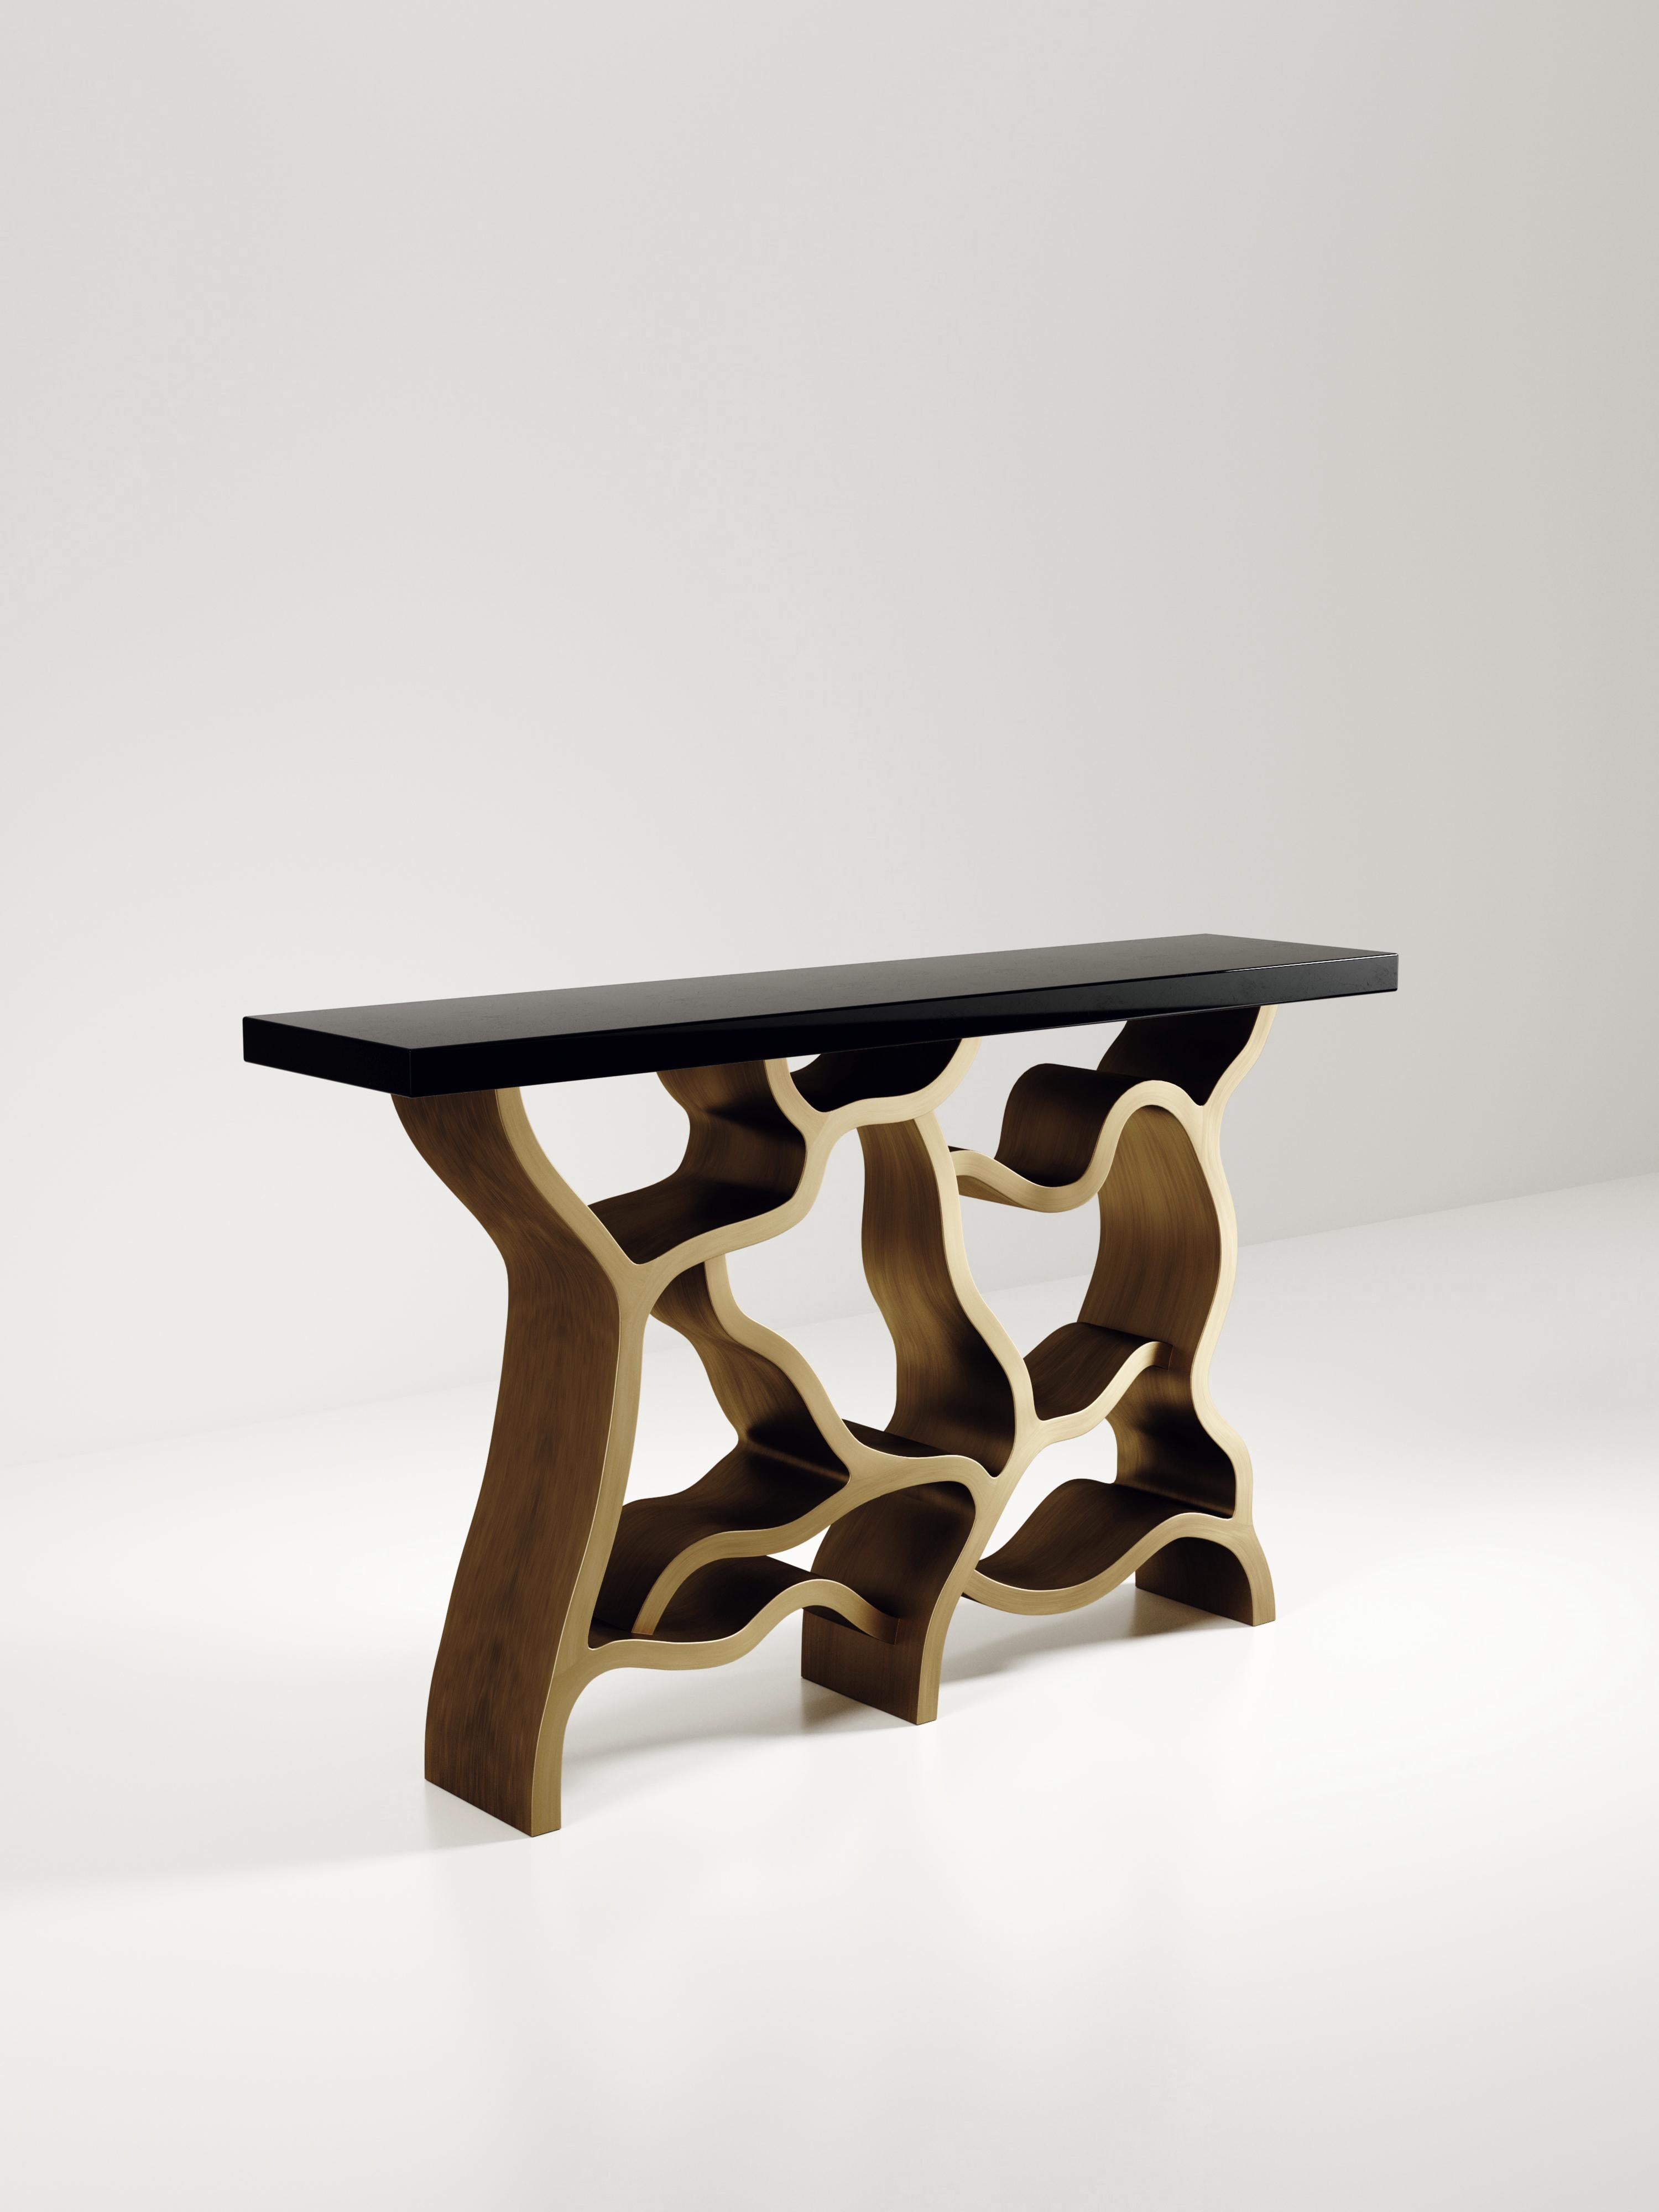 The Leaf Console Table by Kifu Paris is a dramatic and organic piece. The black pen shell inlaid rectangle top sits on a striking bronze-patina brass base that emulates intertwining branches. This piece is designed by Kifu Augousti the daughter of